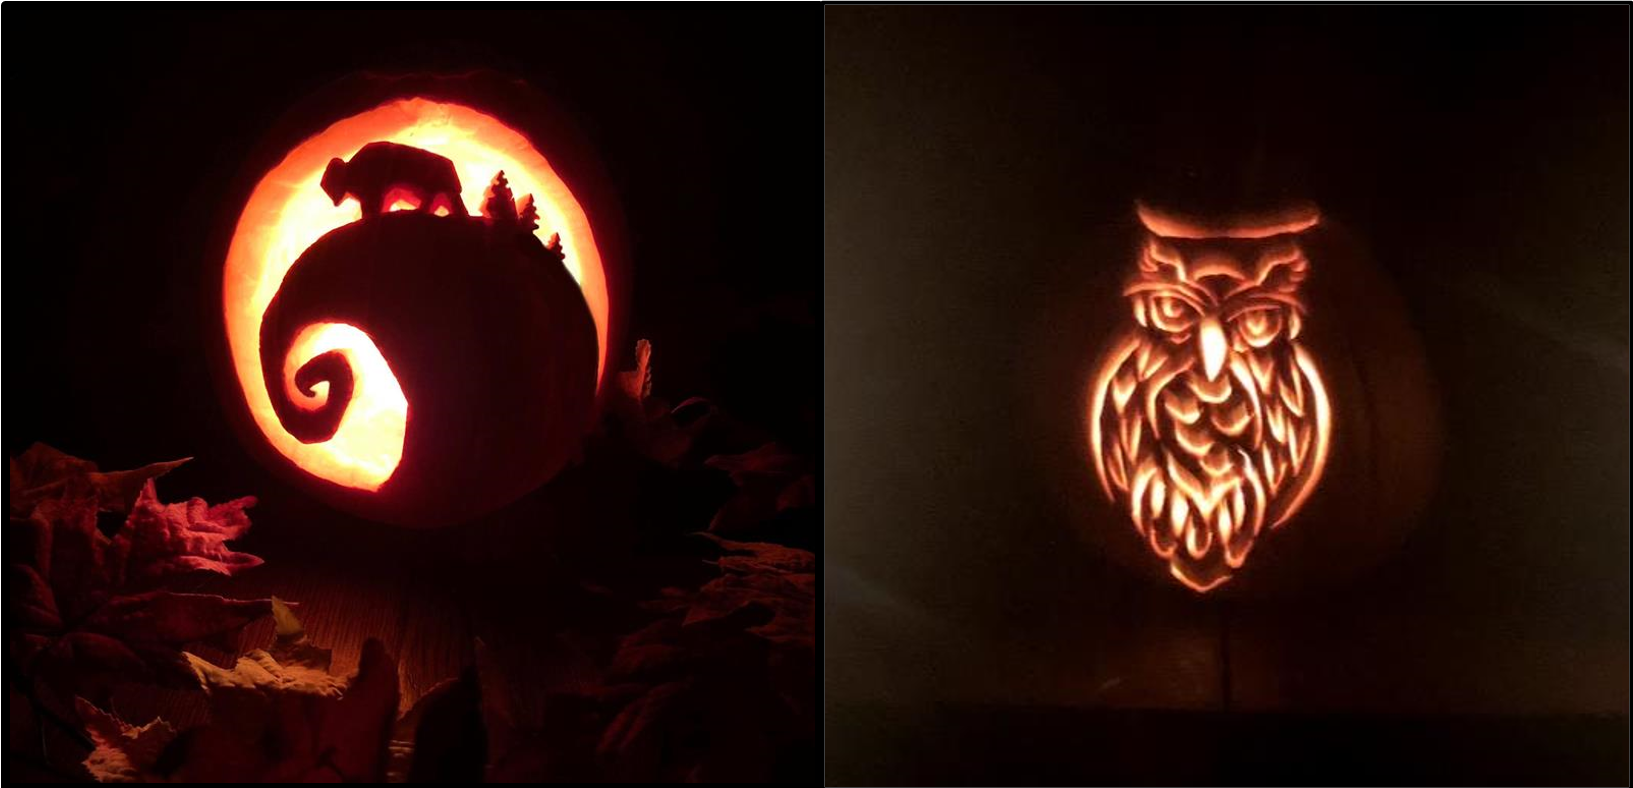 A jack o' lantern carved with a bison on a hill and another carved as an owl